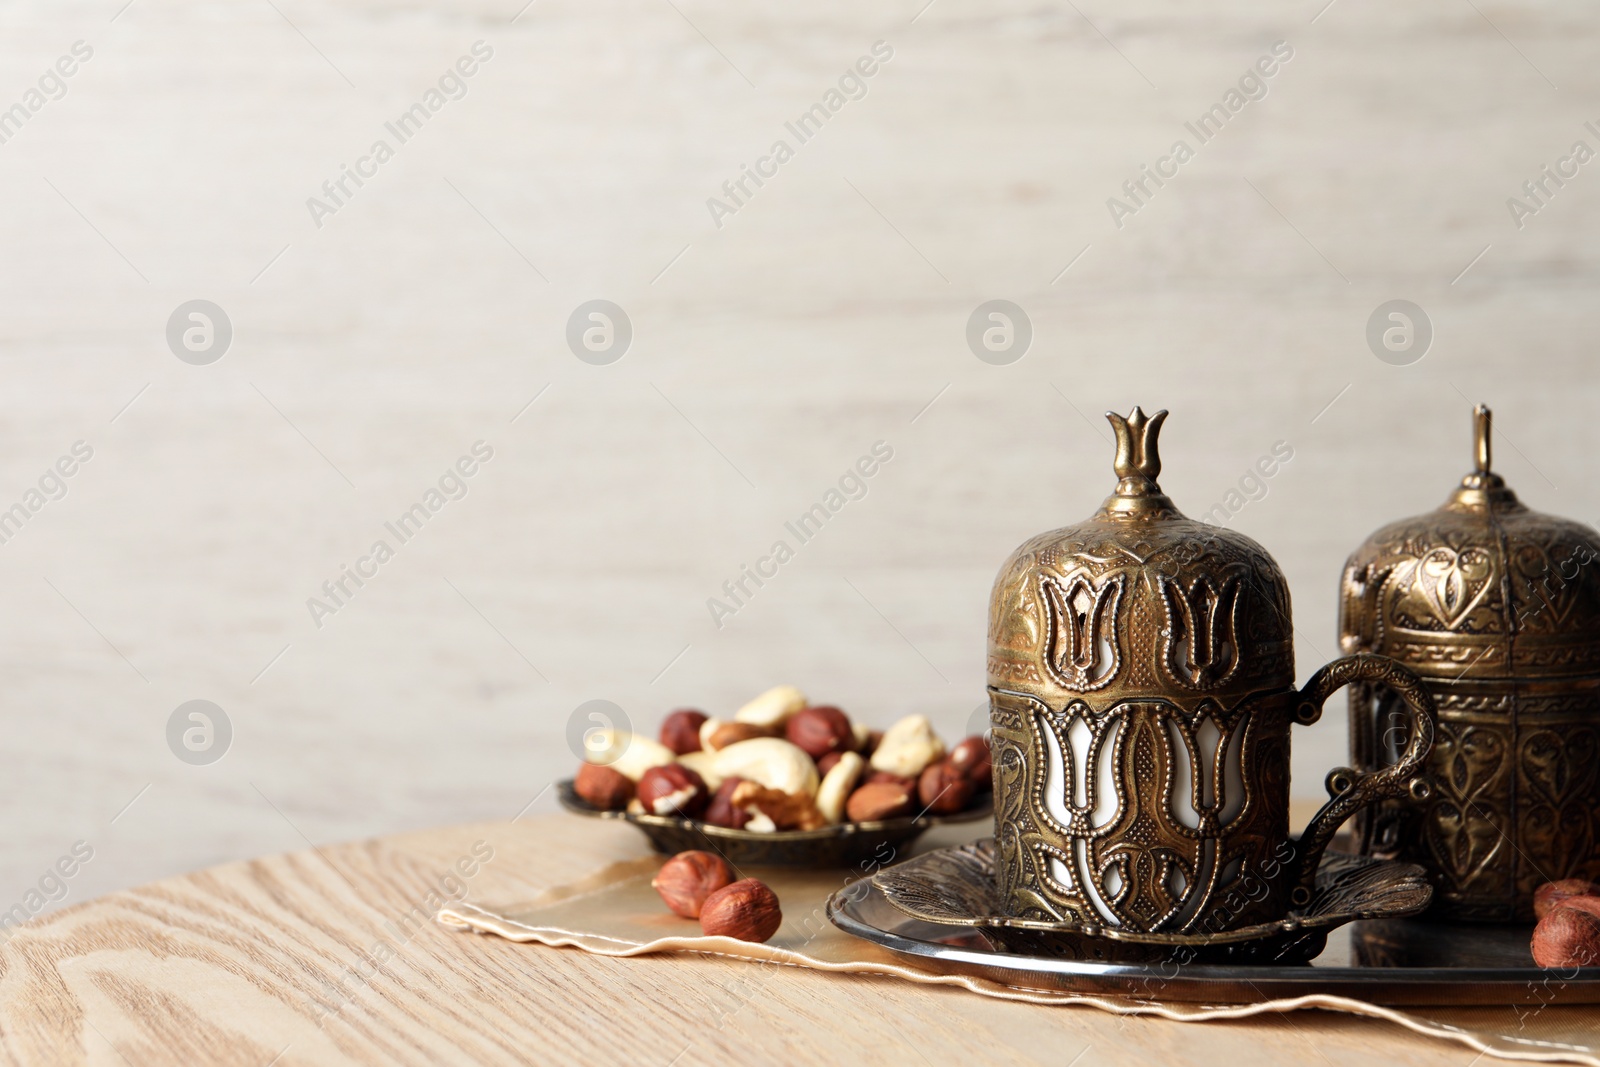 Photo of Tea and nuts served in vintage tea set on wooden table, space for text